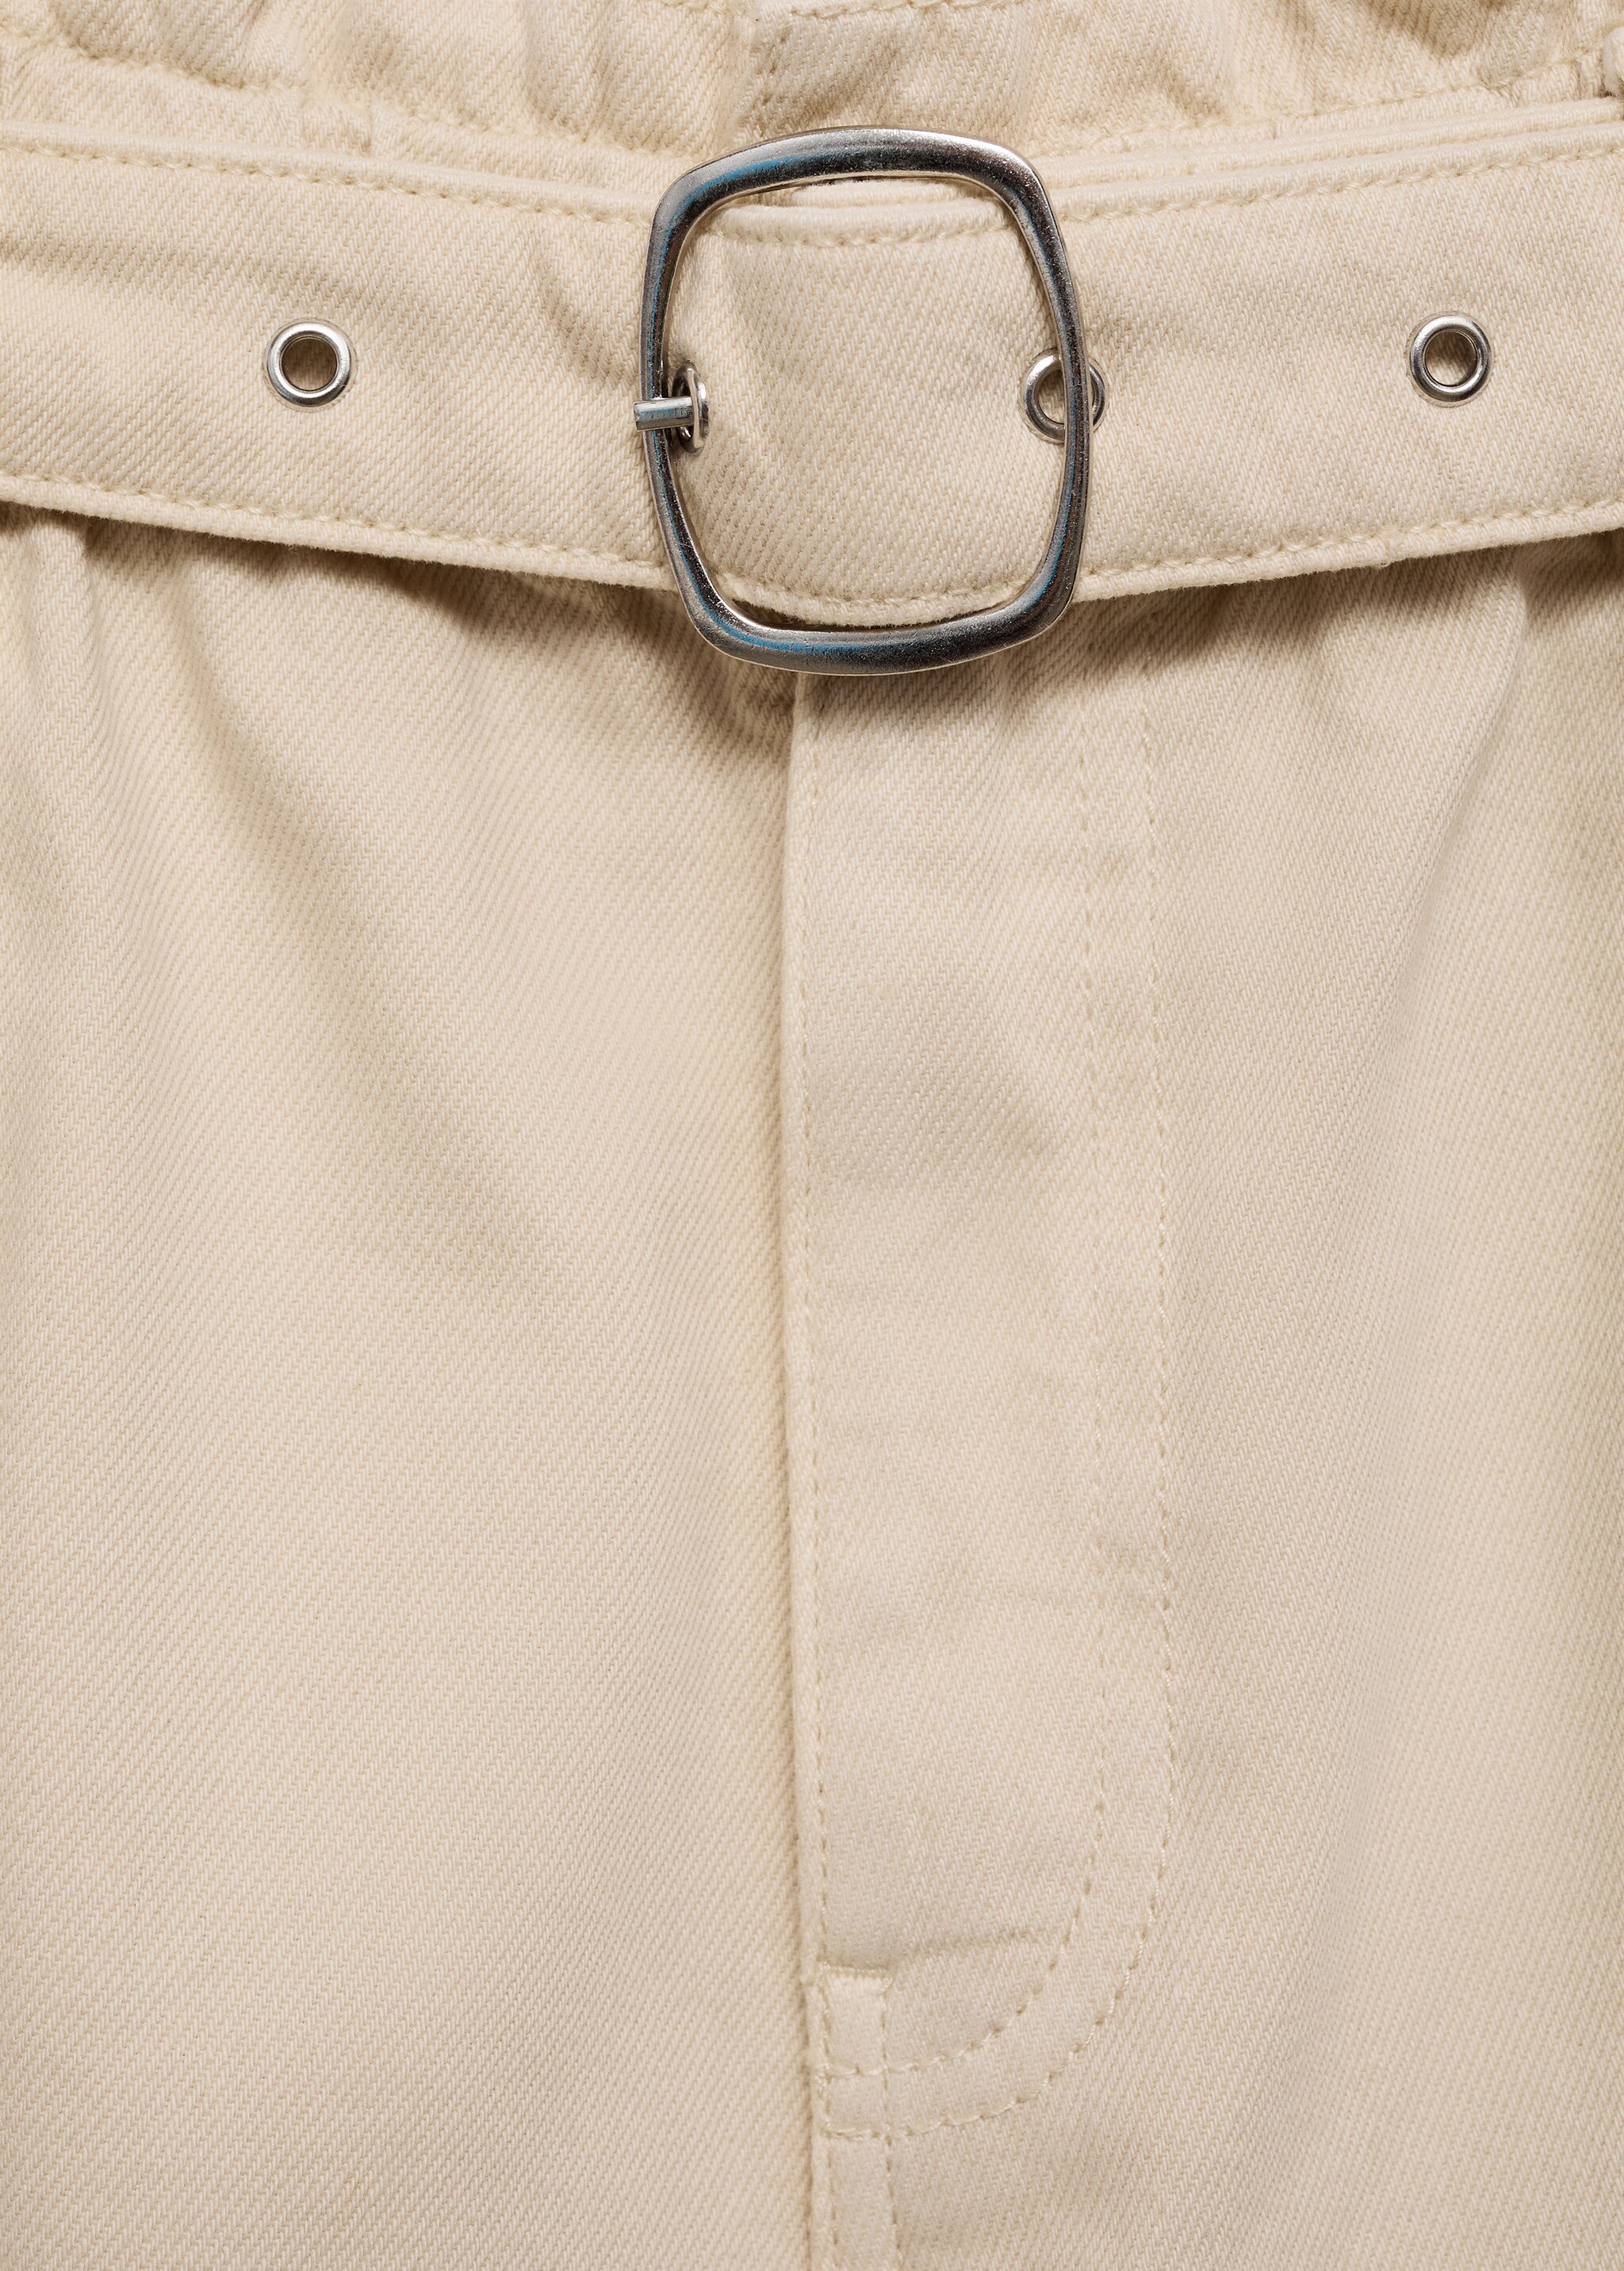 Denim shorts with belt - Details of the article 8